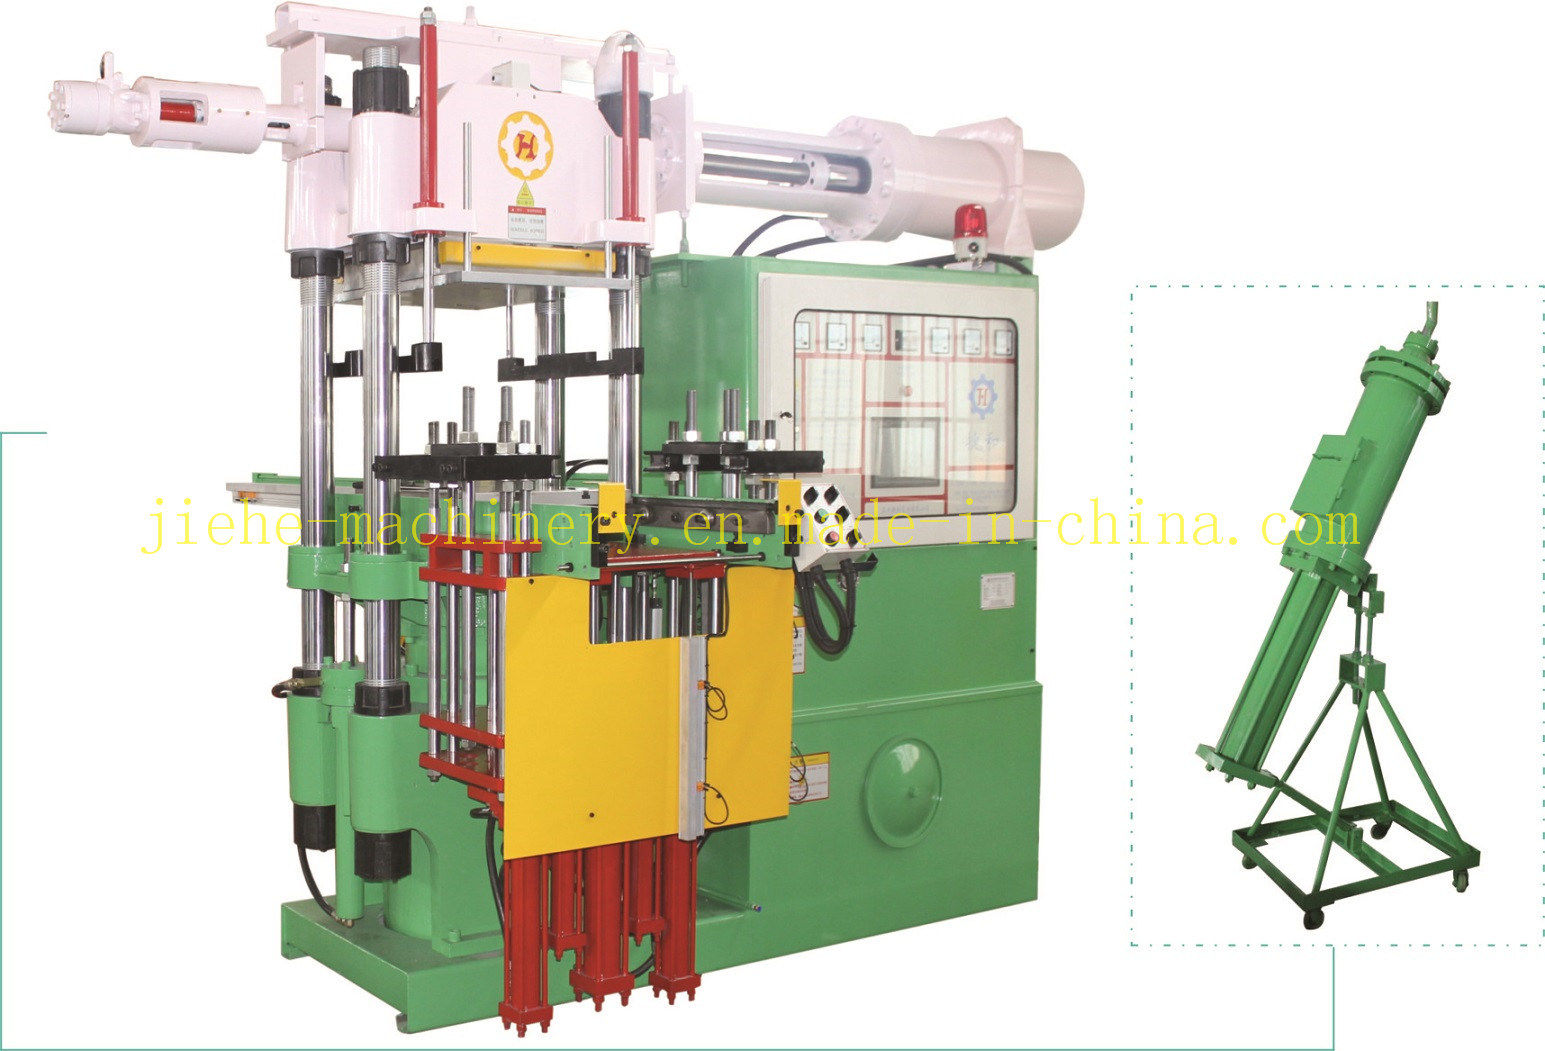 Horizontal Automatic Rubber Silicone Injection Moulding Press Machine